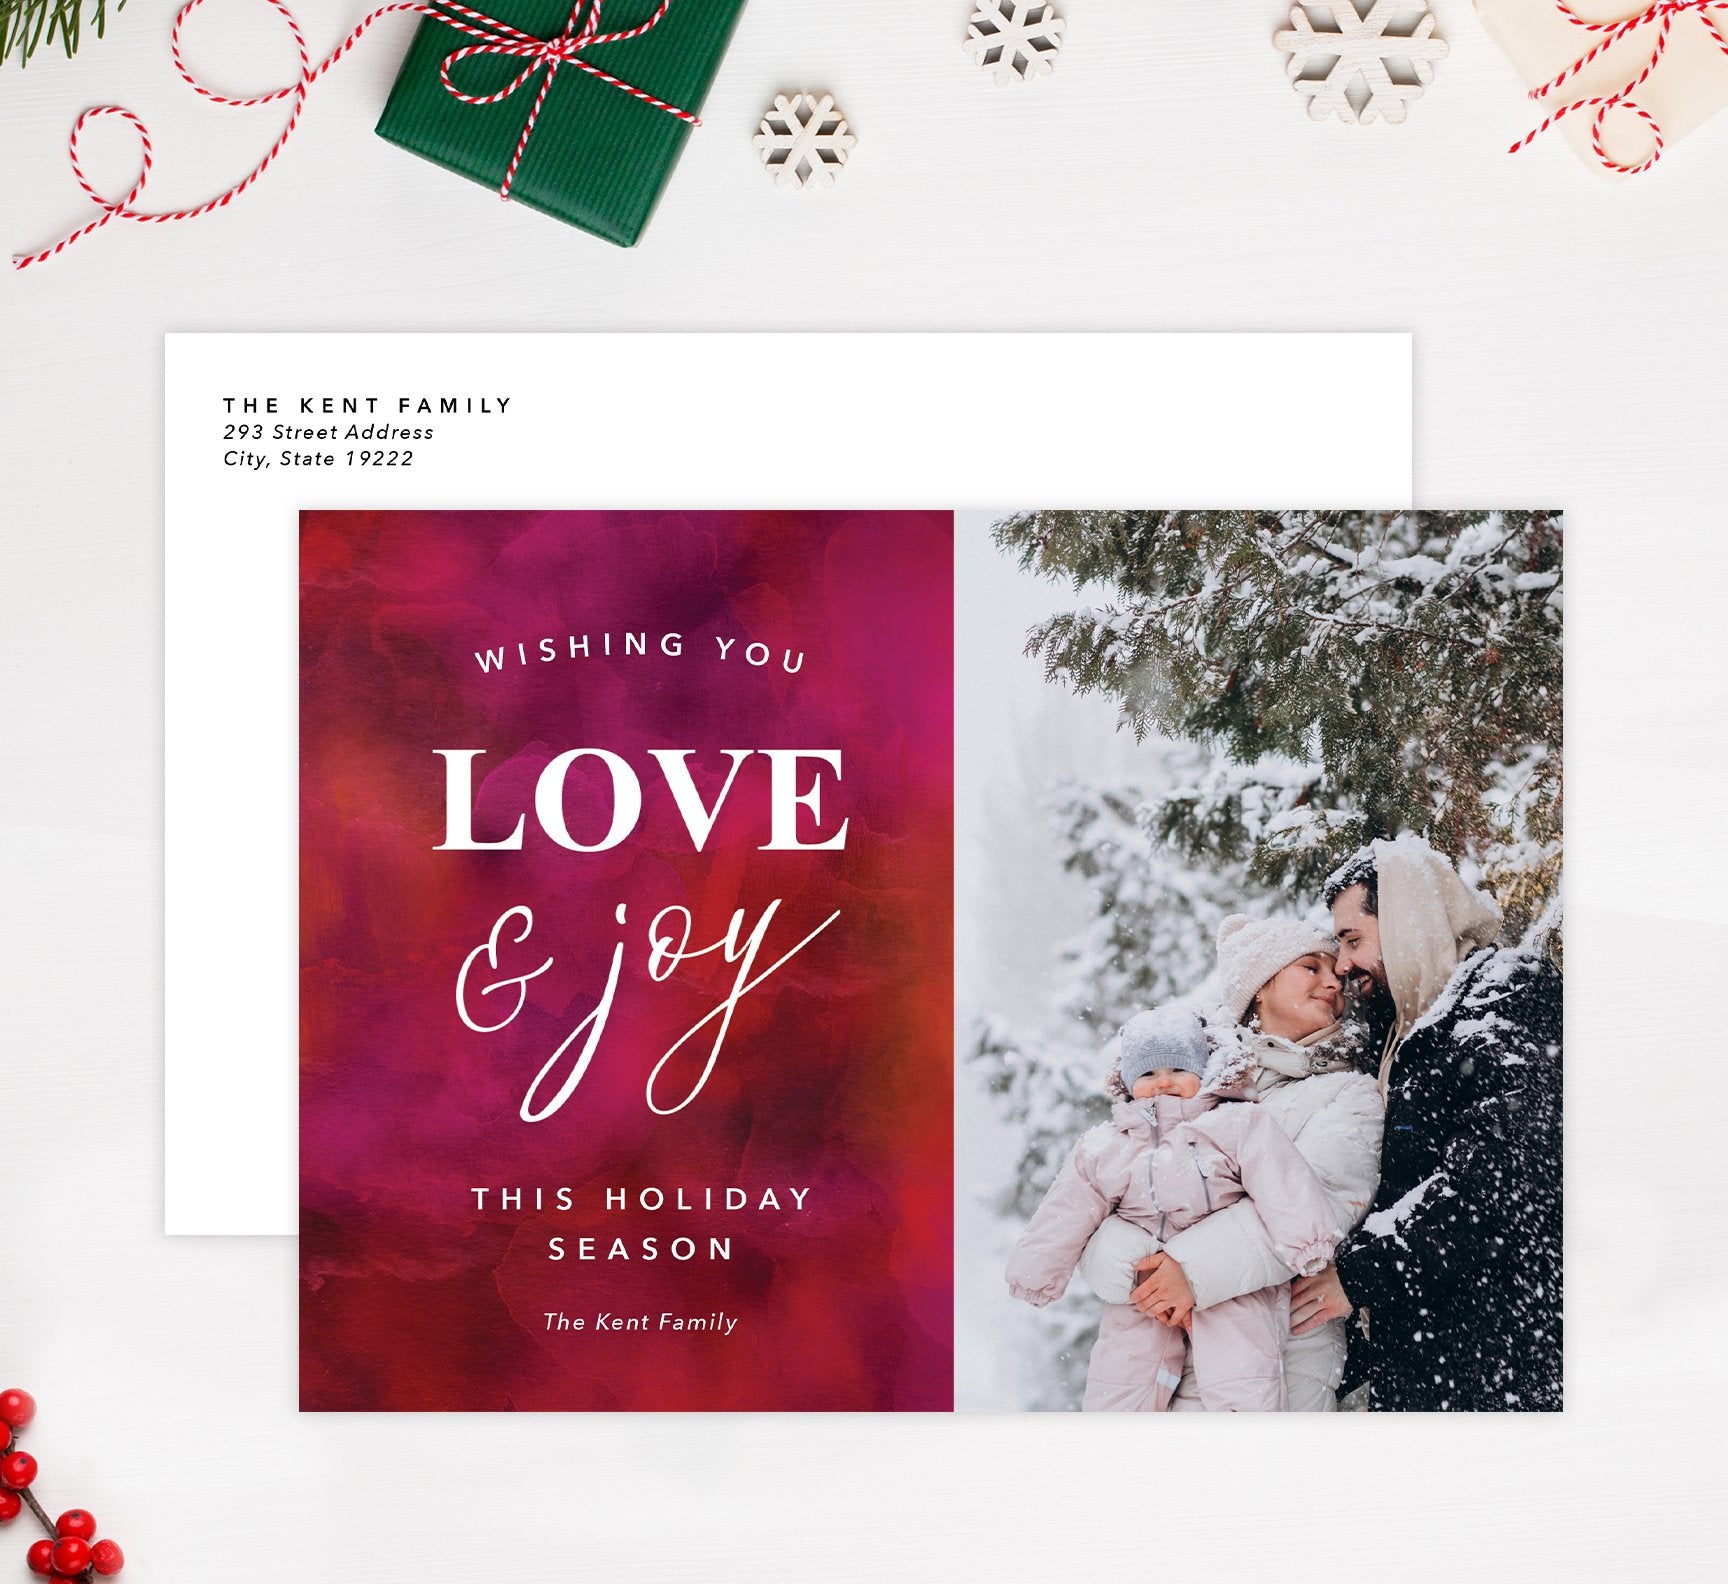 Love and Joy Holiday Card Mockup; Holiday card with envelope and return address printed on it. 